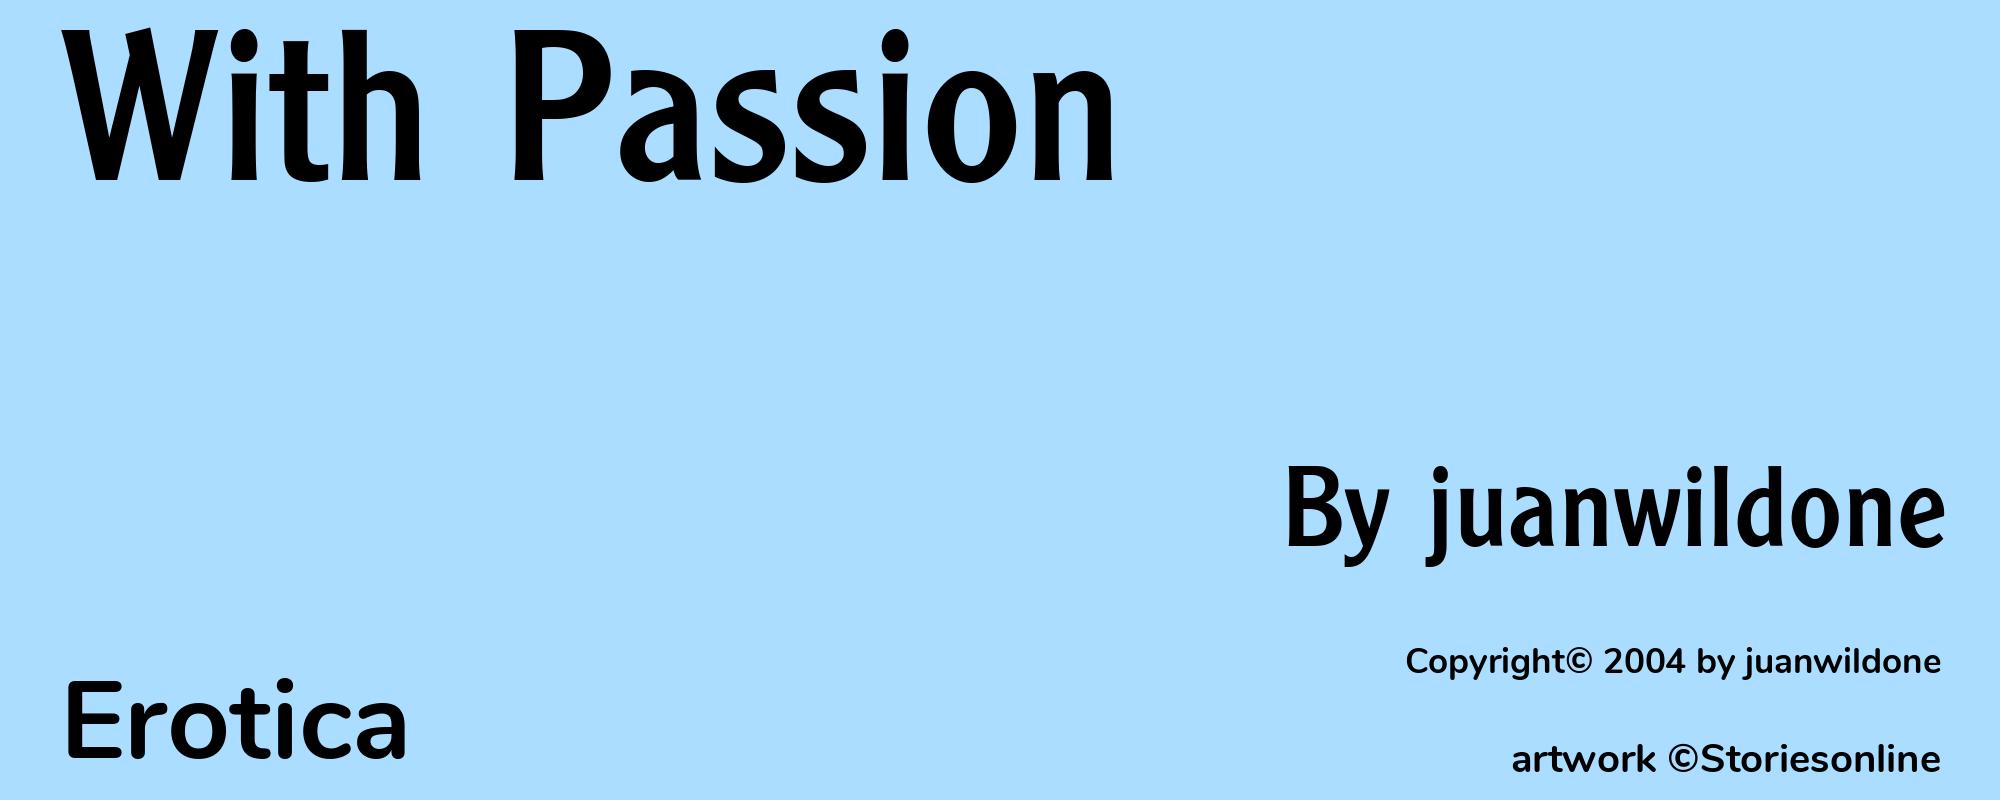 With Passion - Cover